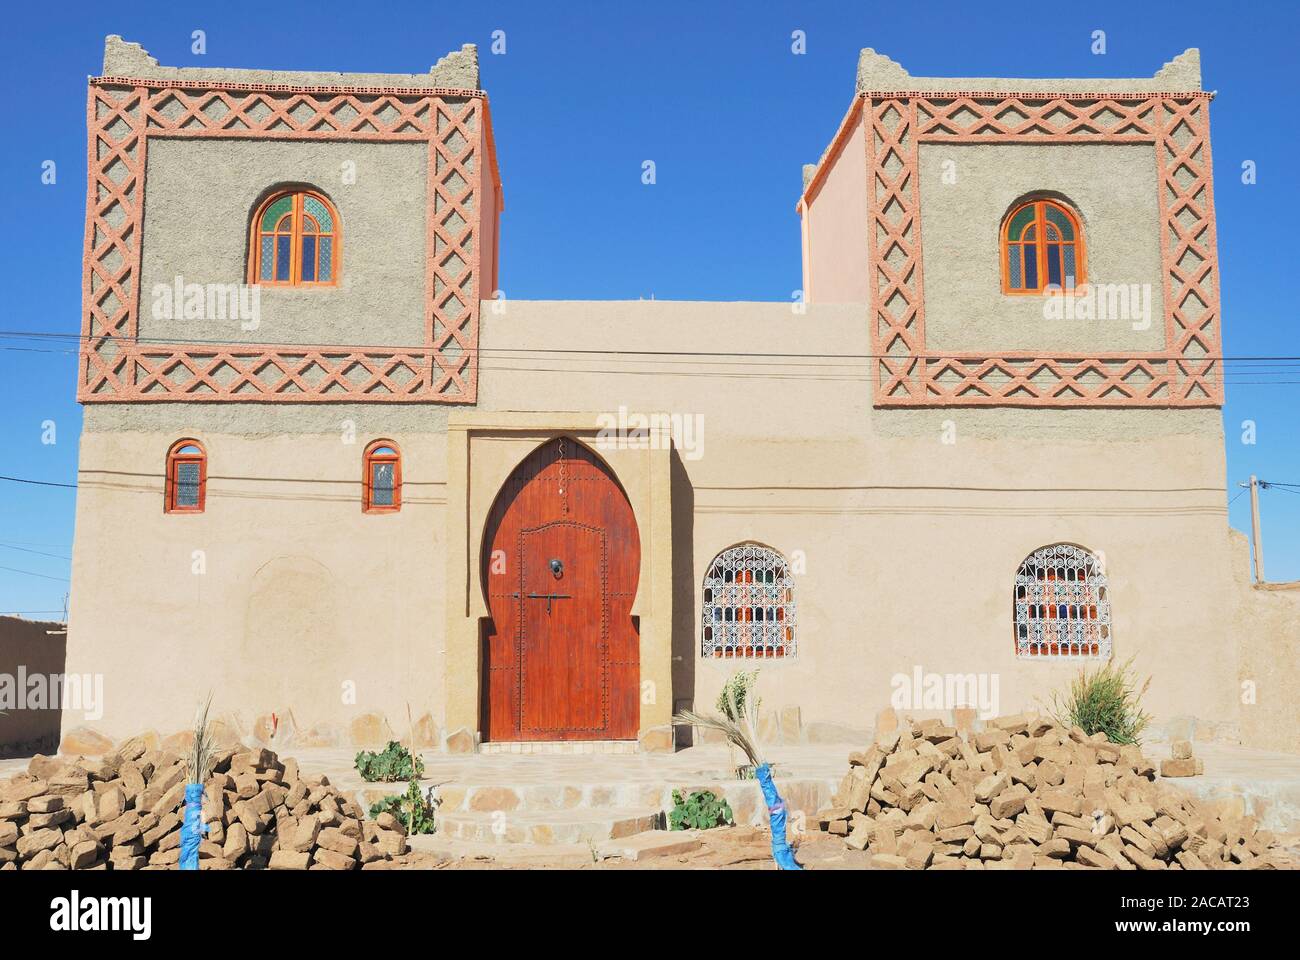 Hotel Kasbah, traditional Berber architecture, Merzouga, Morocco, Africa Stock Photo